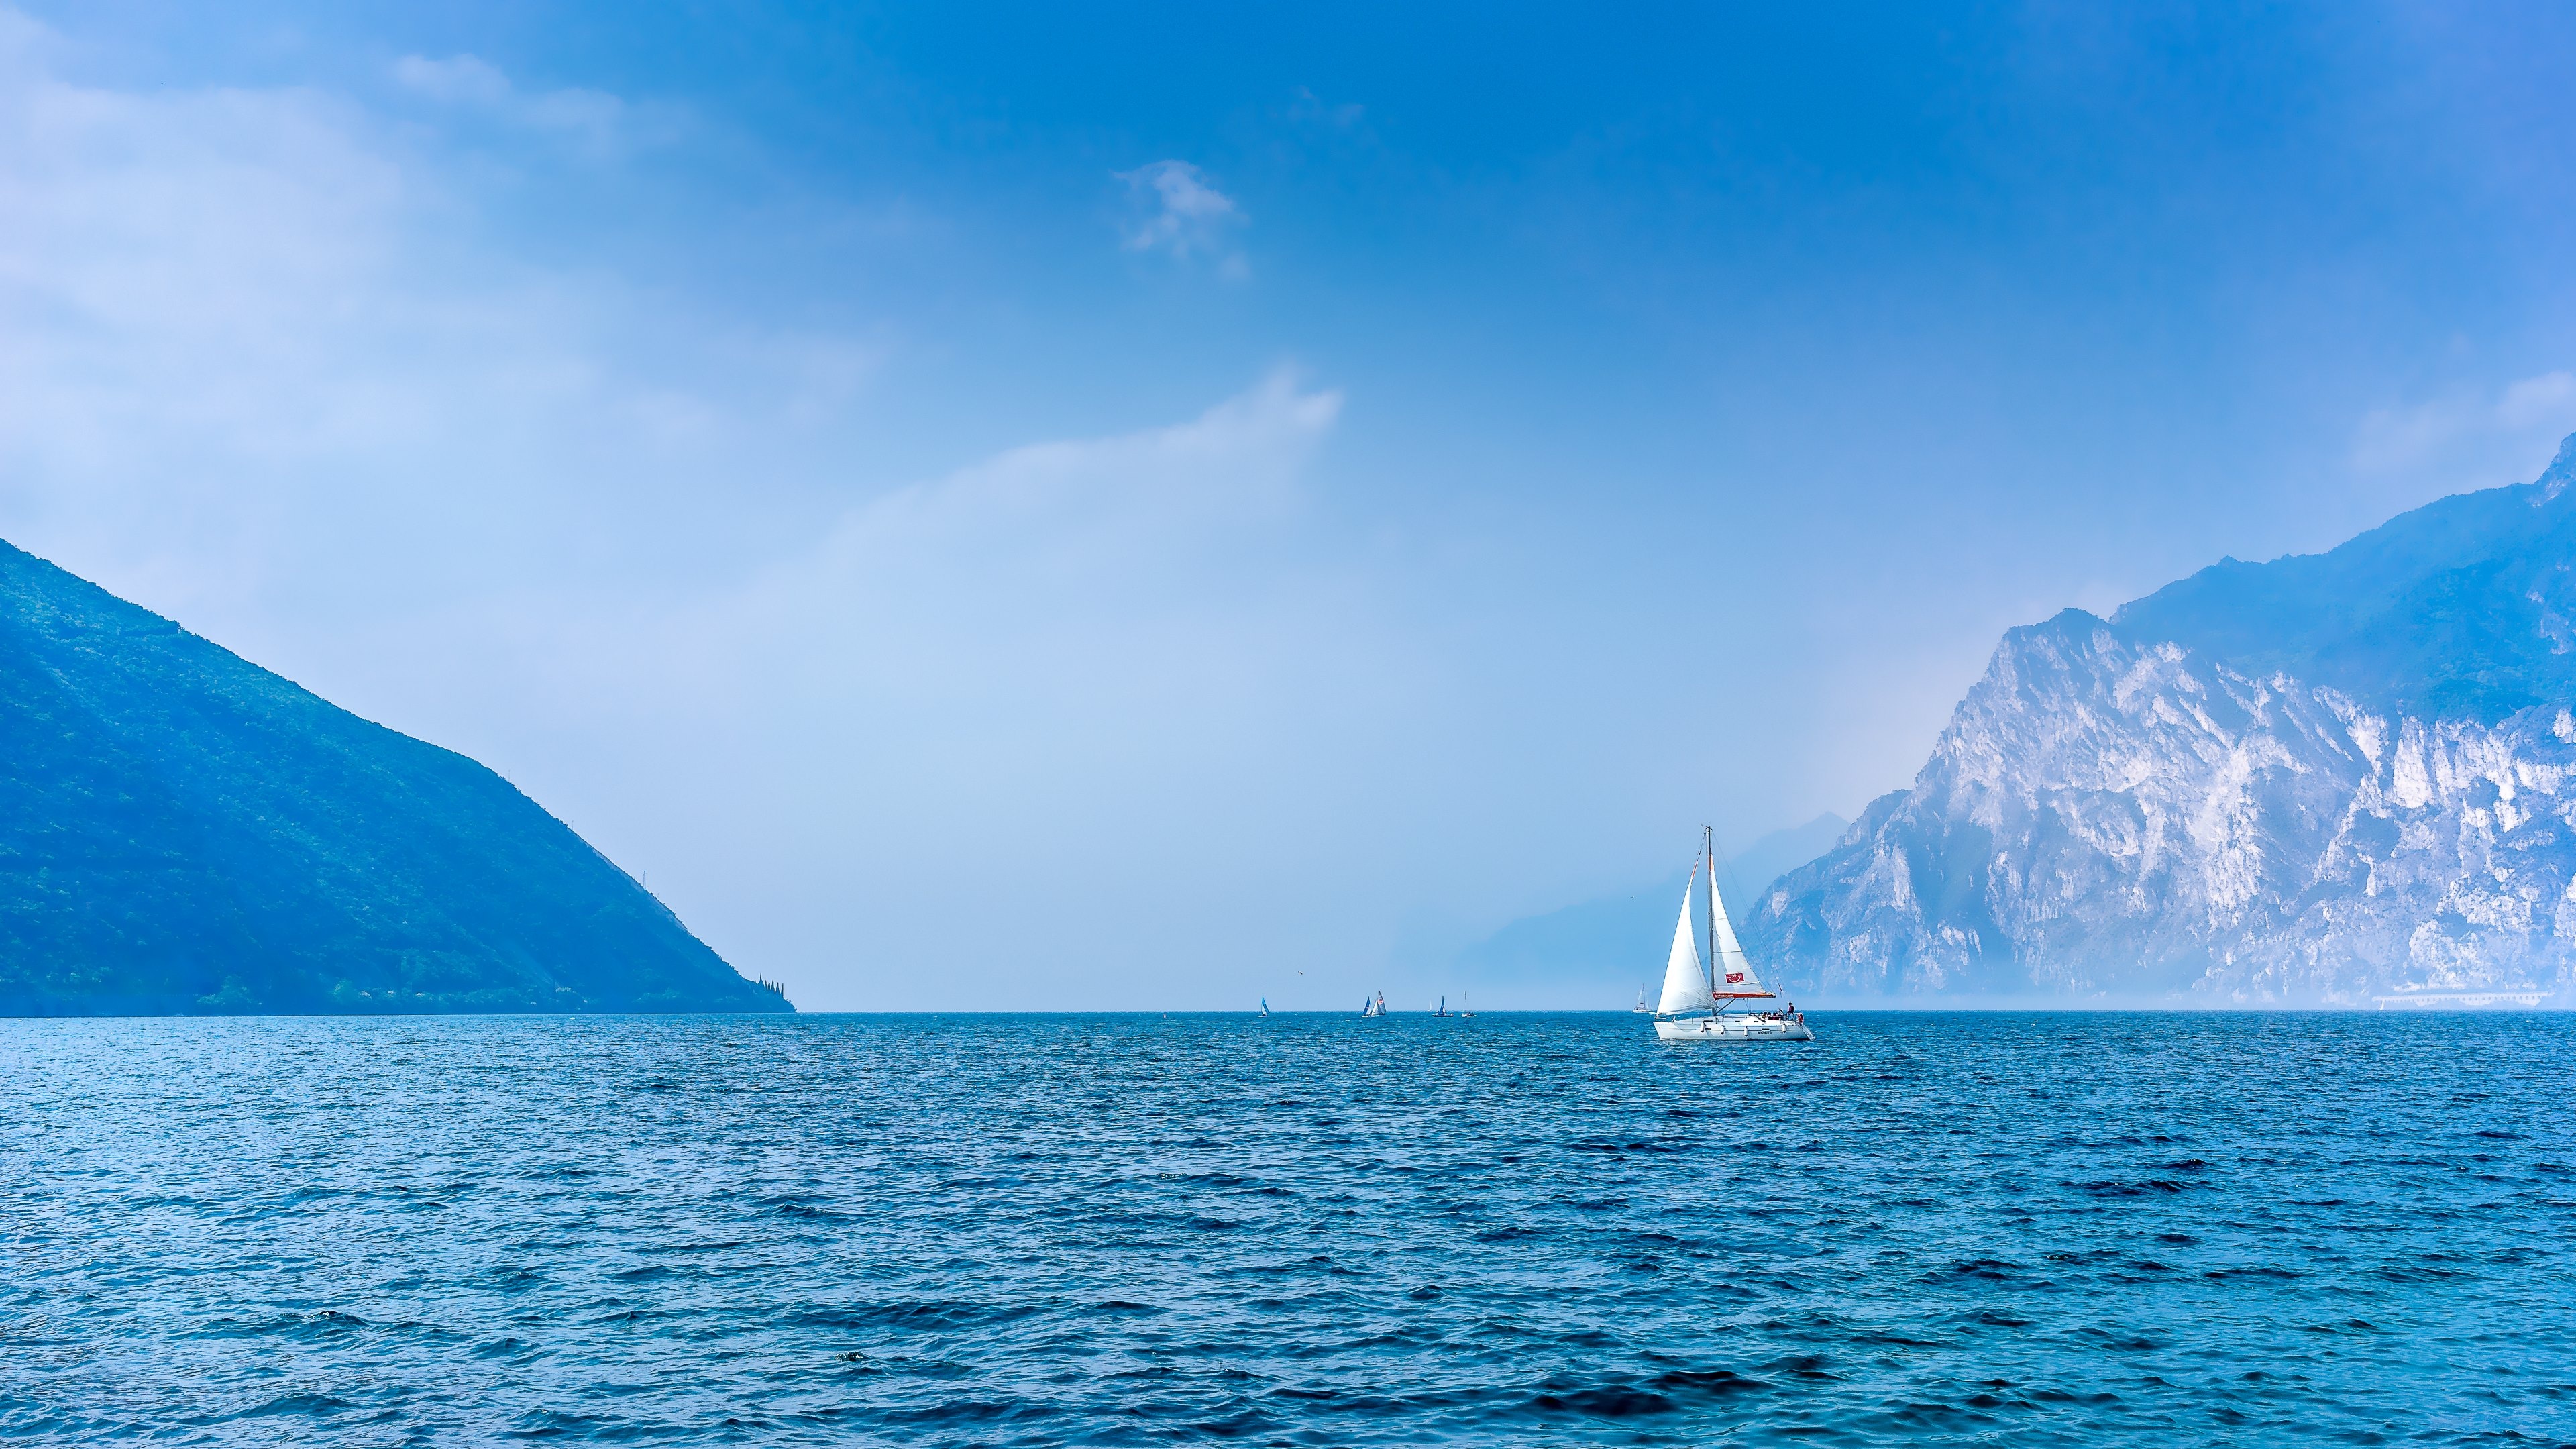 Sailing: An active water sport, A voyage at the sea, Yachting, Boating. 3840x2160 4K Background.